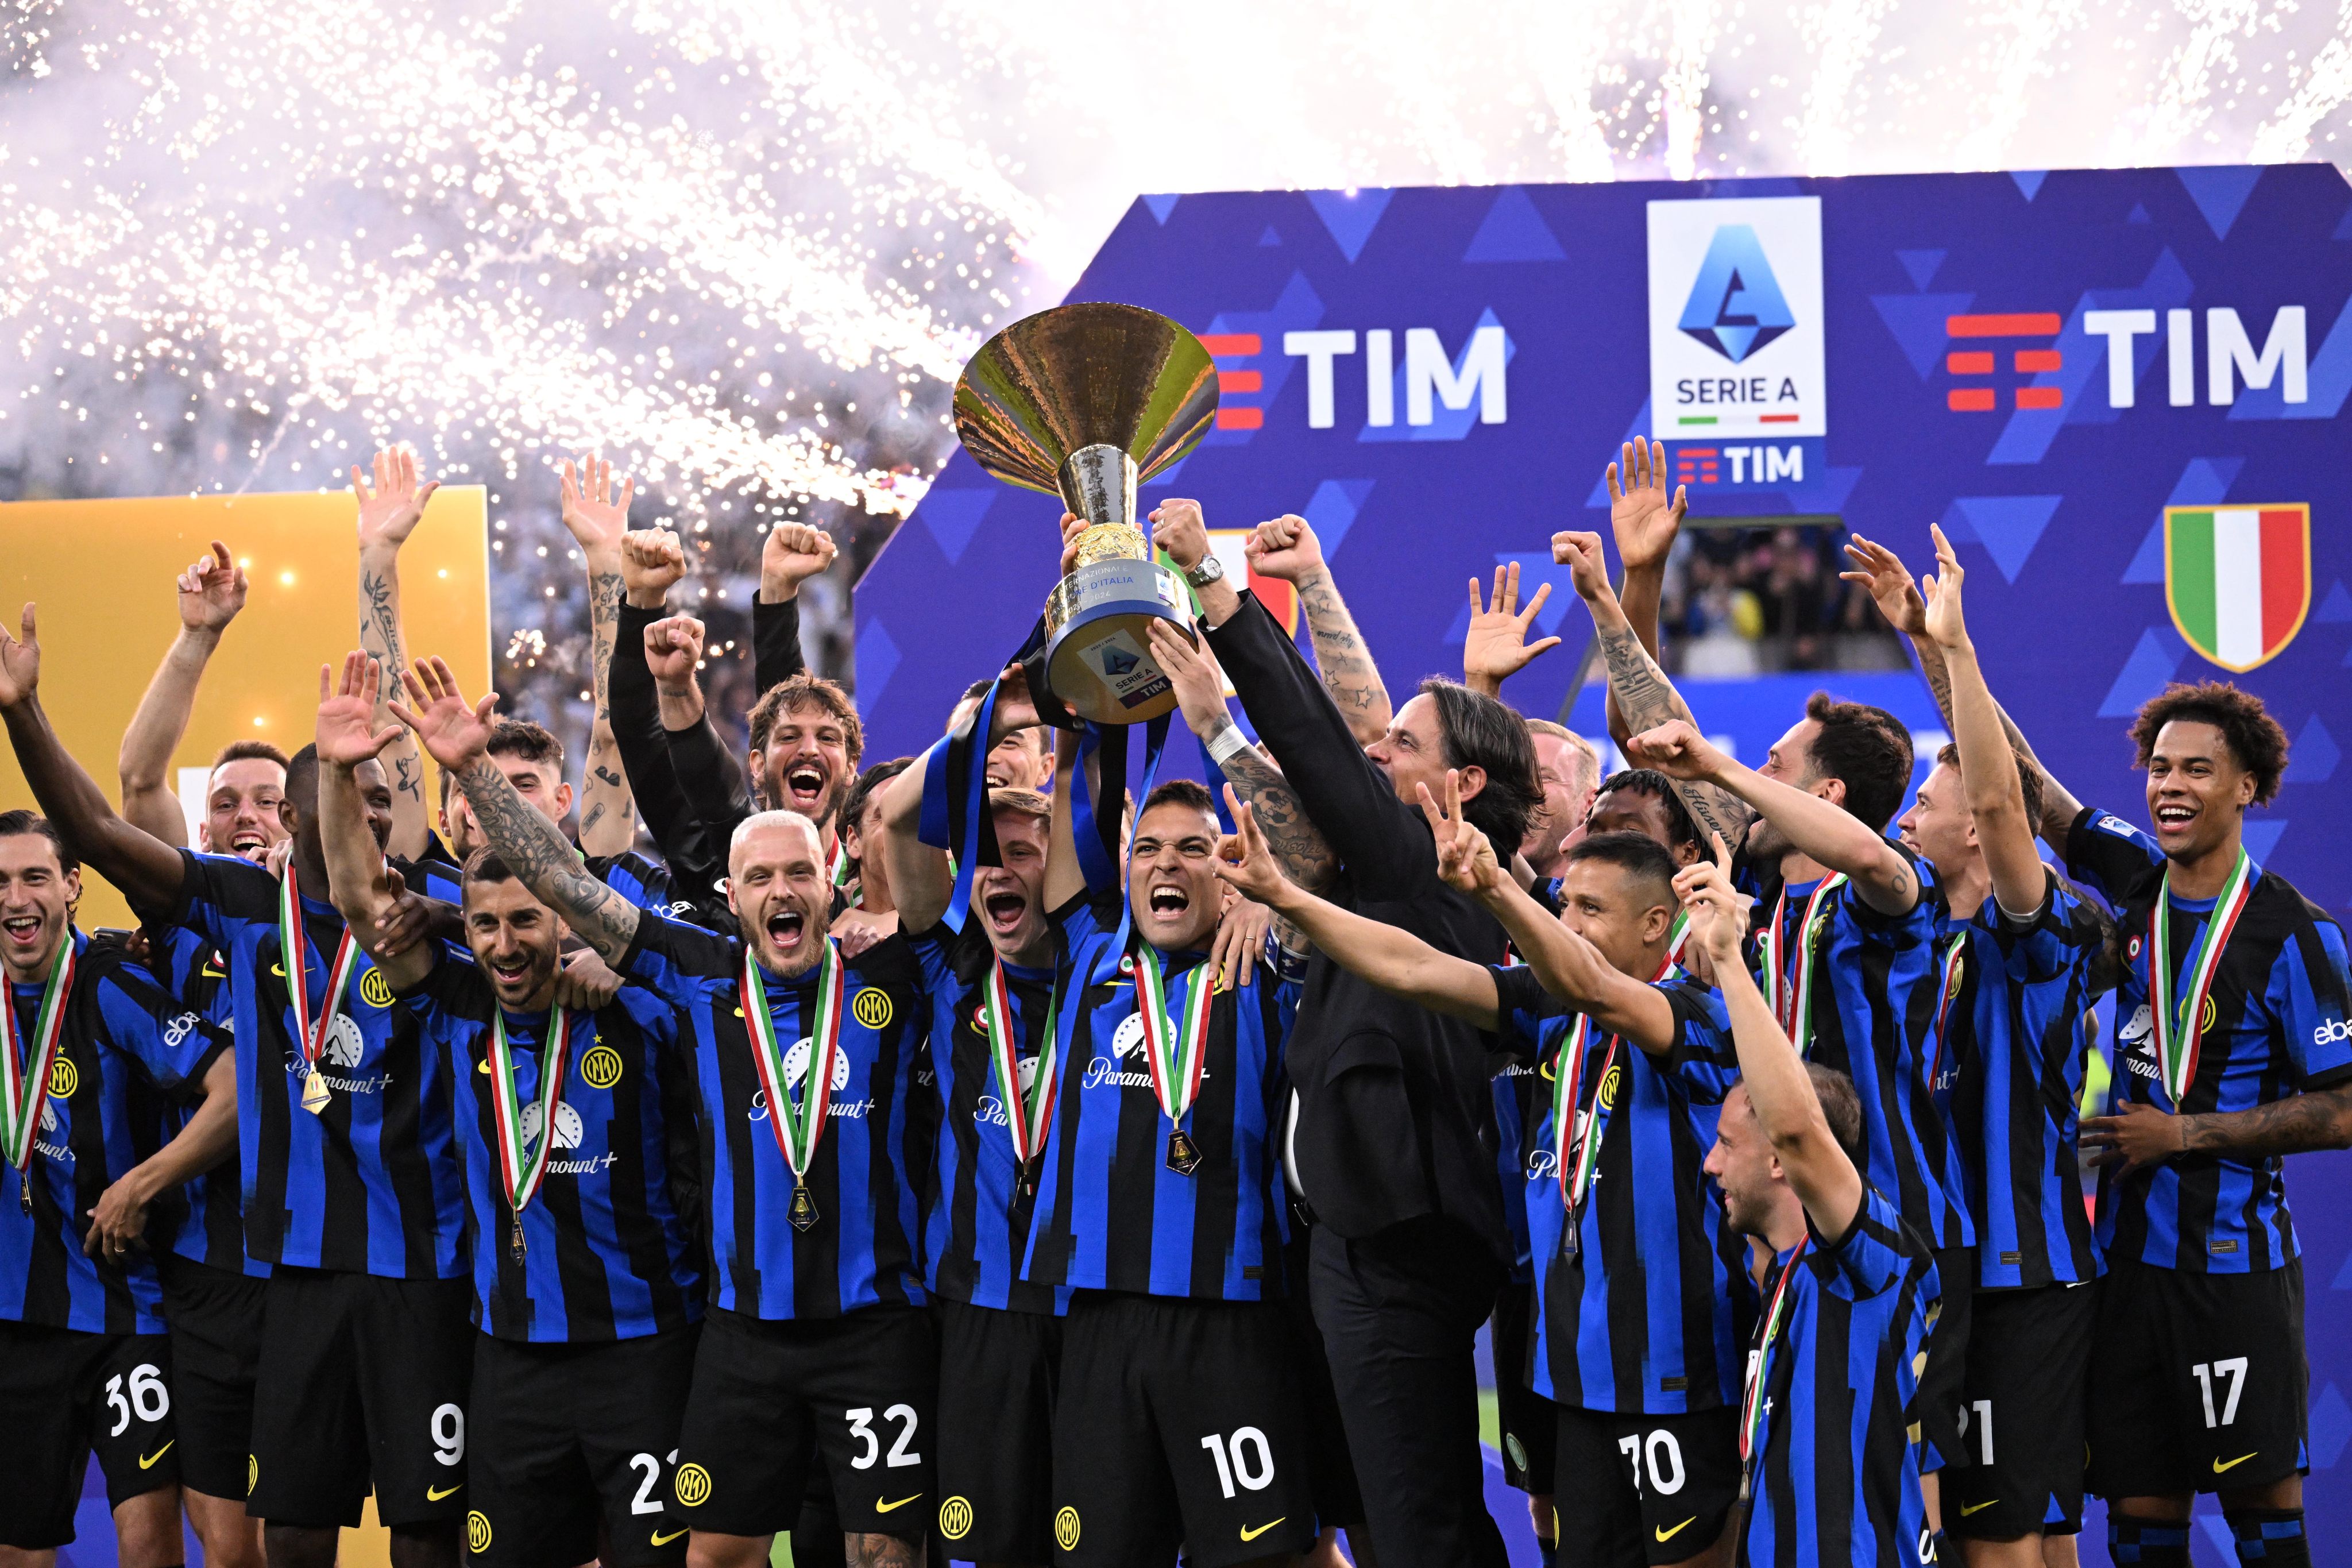 Members of Inter Milan celebrate with the Serie A trophy in Milan last week. Off the field, the story was a little different. Photo: Xinhua